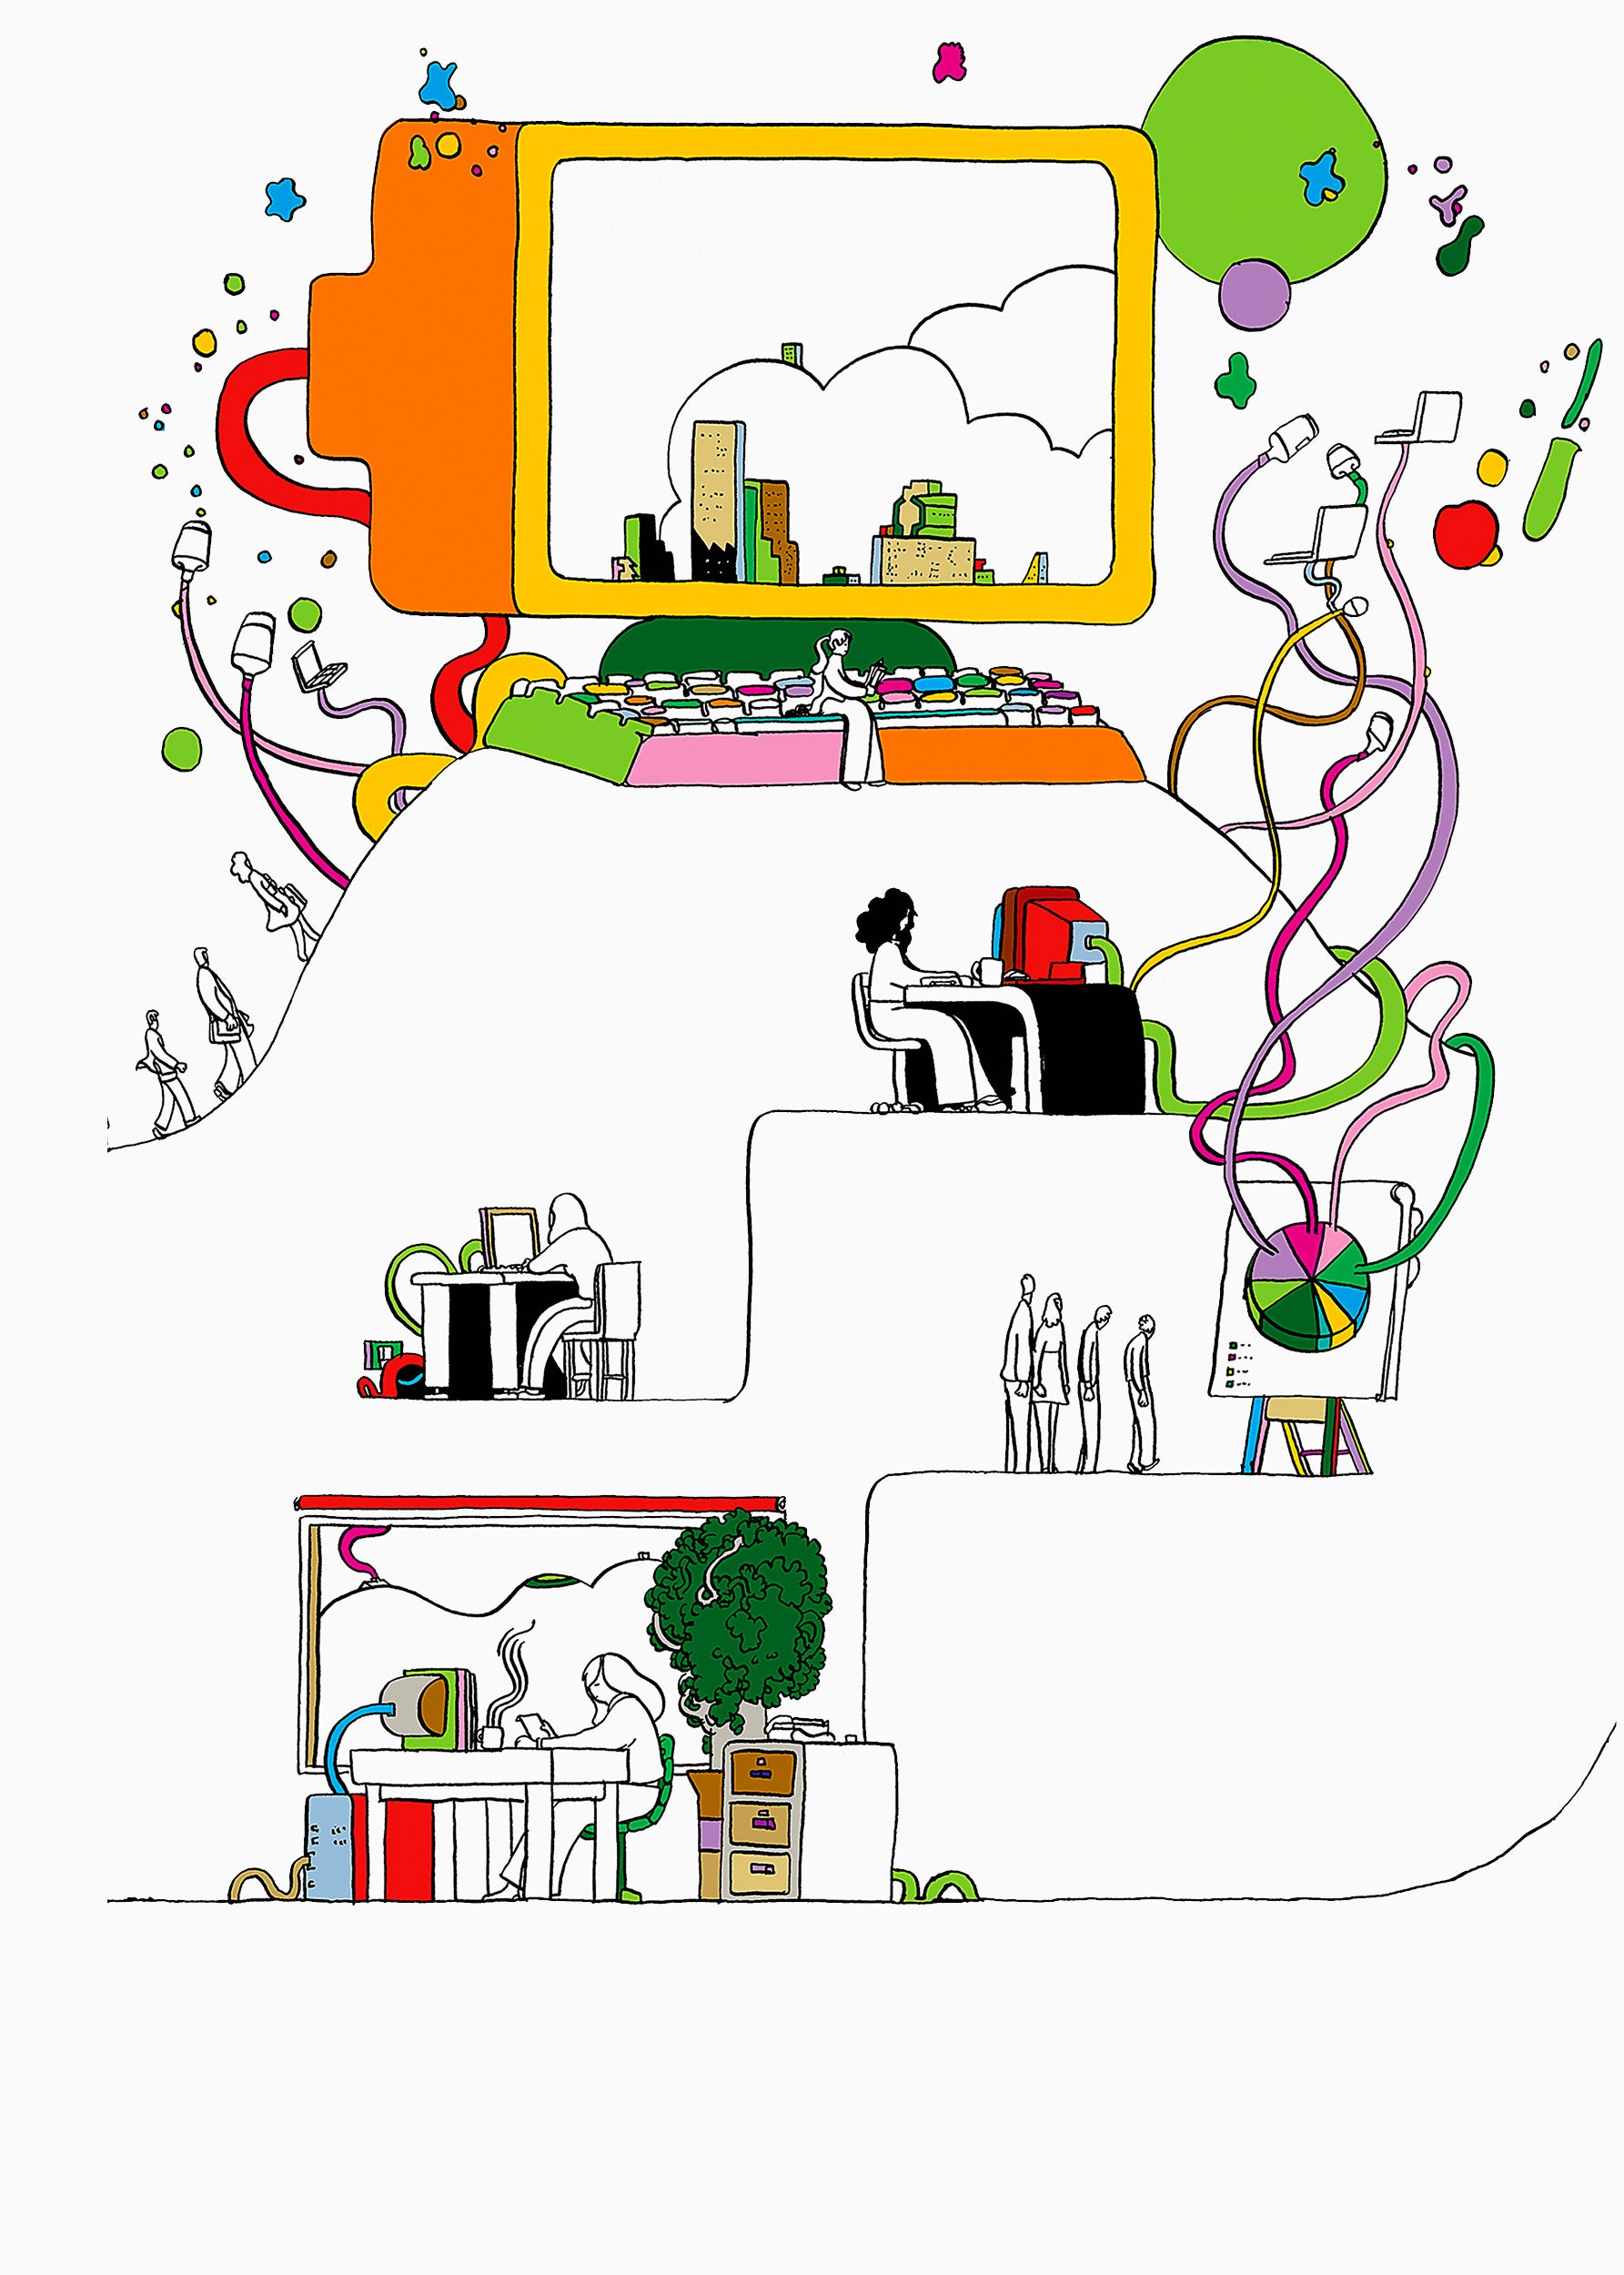 Illustration of students connecting virtually to larger network.